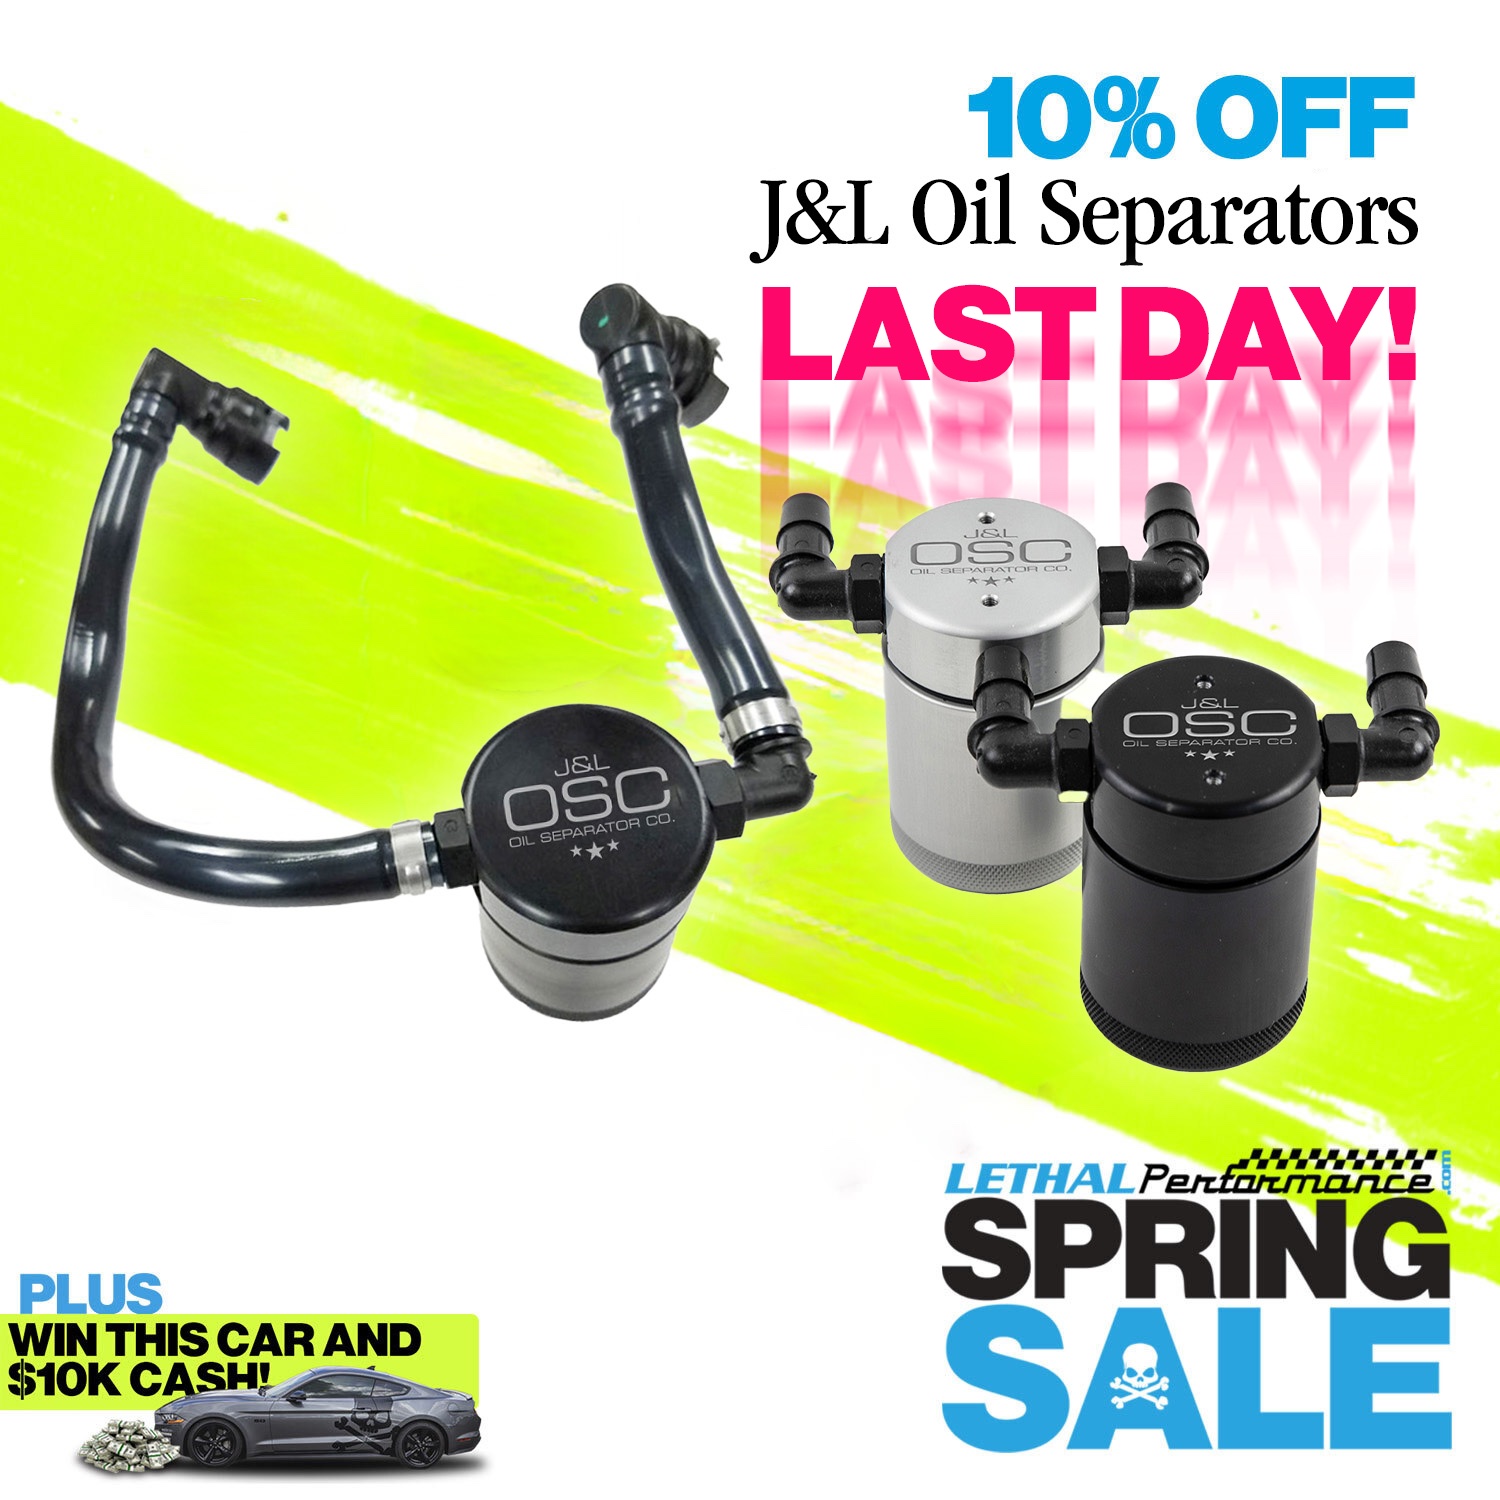 S650 Mustang Spring SALE has SPRUNG here at Lethal Performance!! jl lasst day spring sale